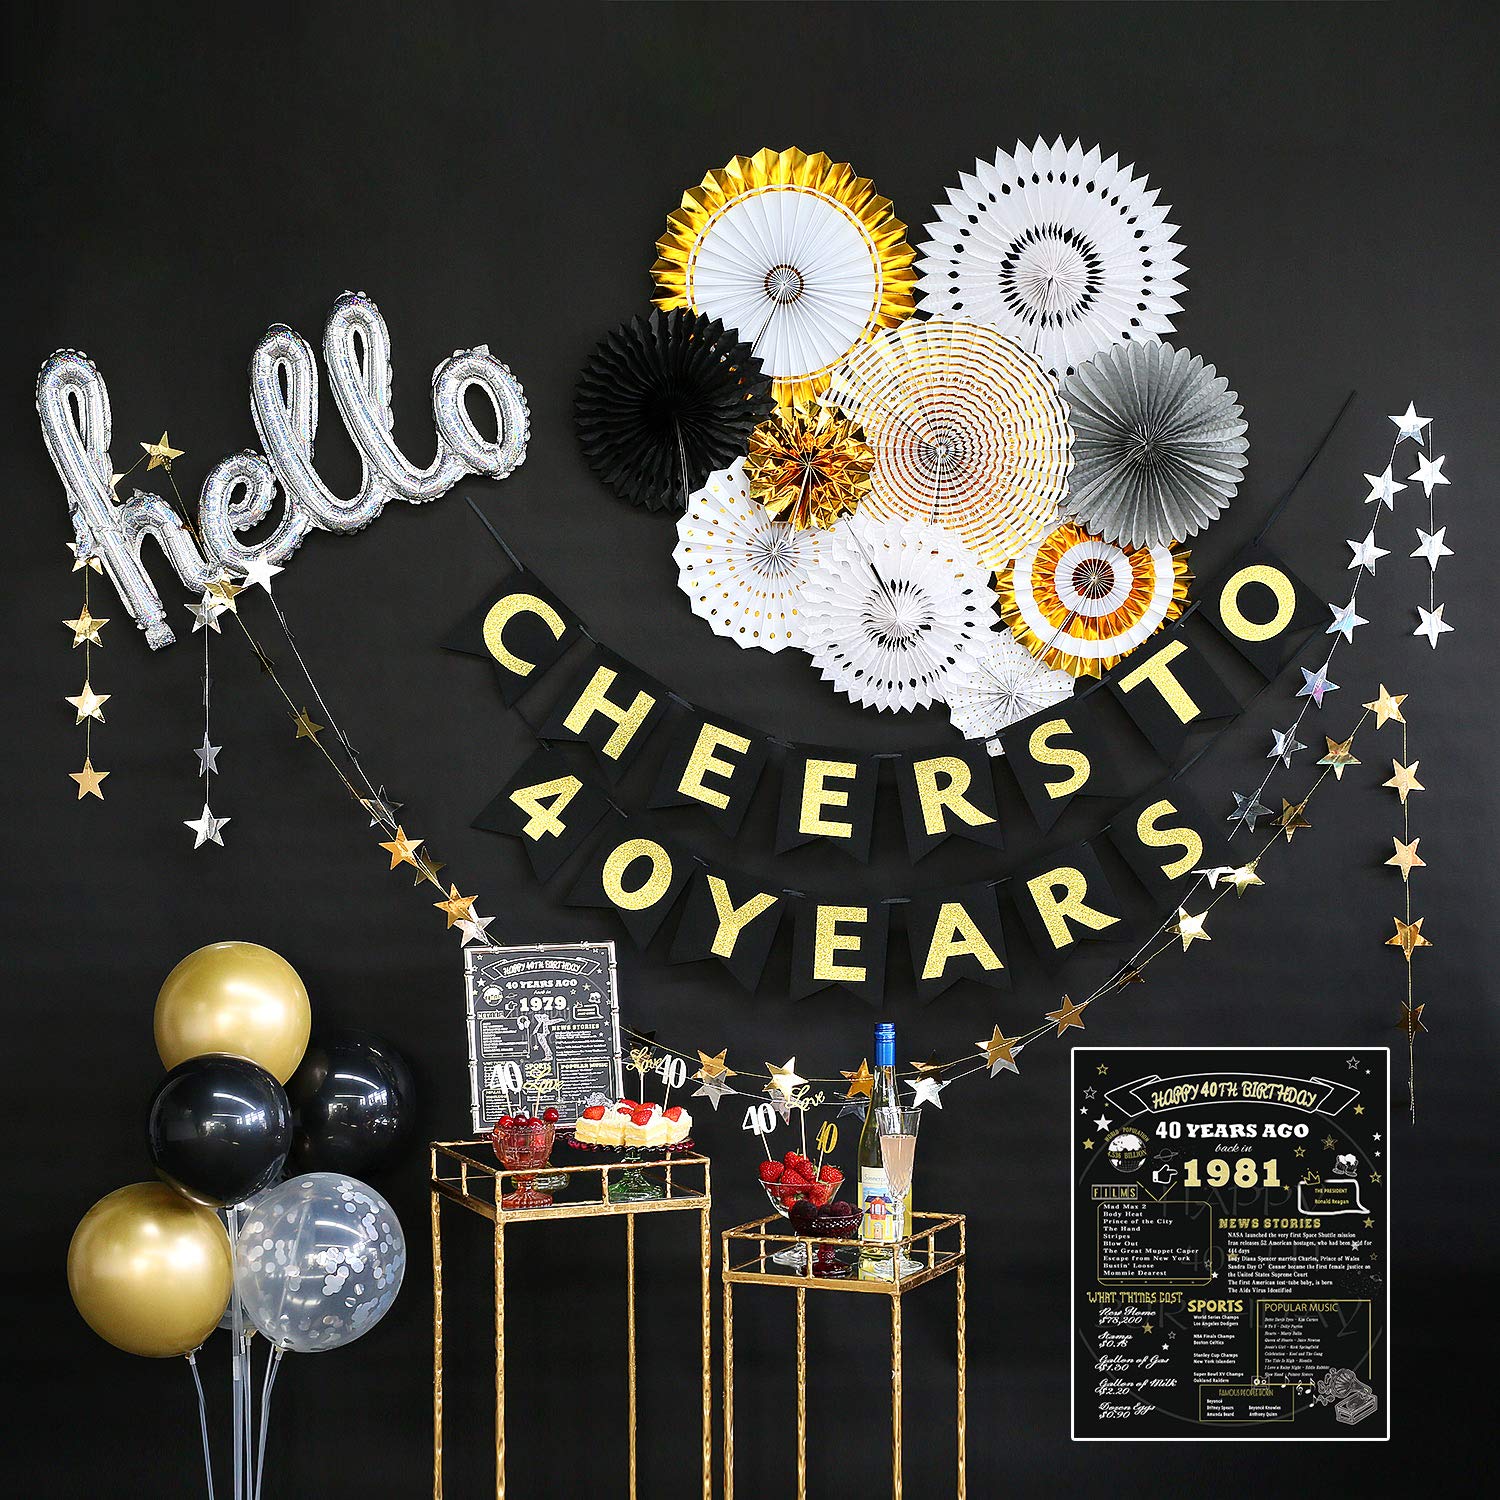 Celebrate in Style 40th birthday decor ideas with These Creative ...